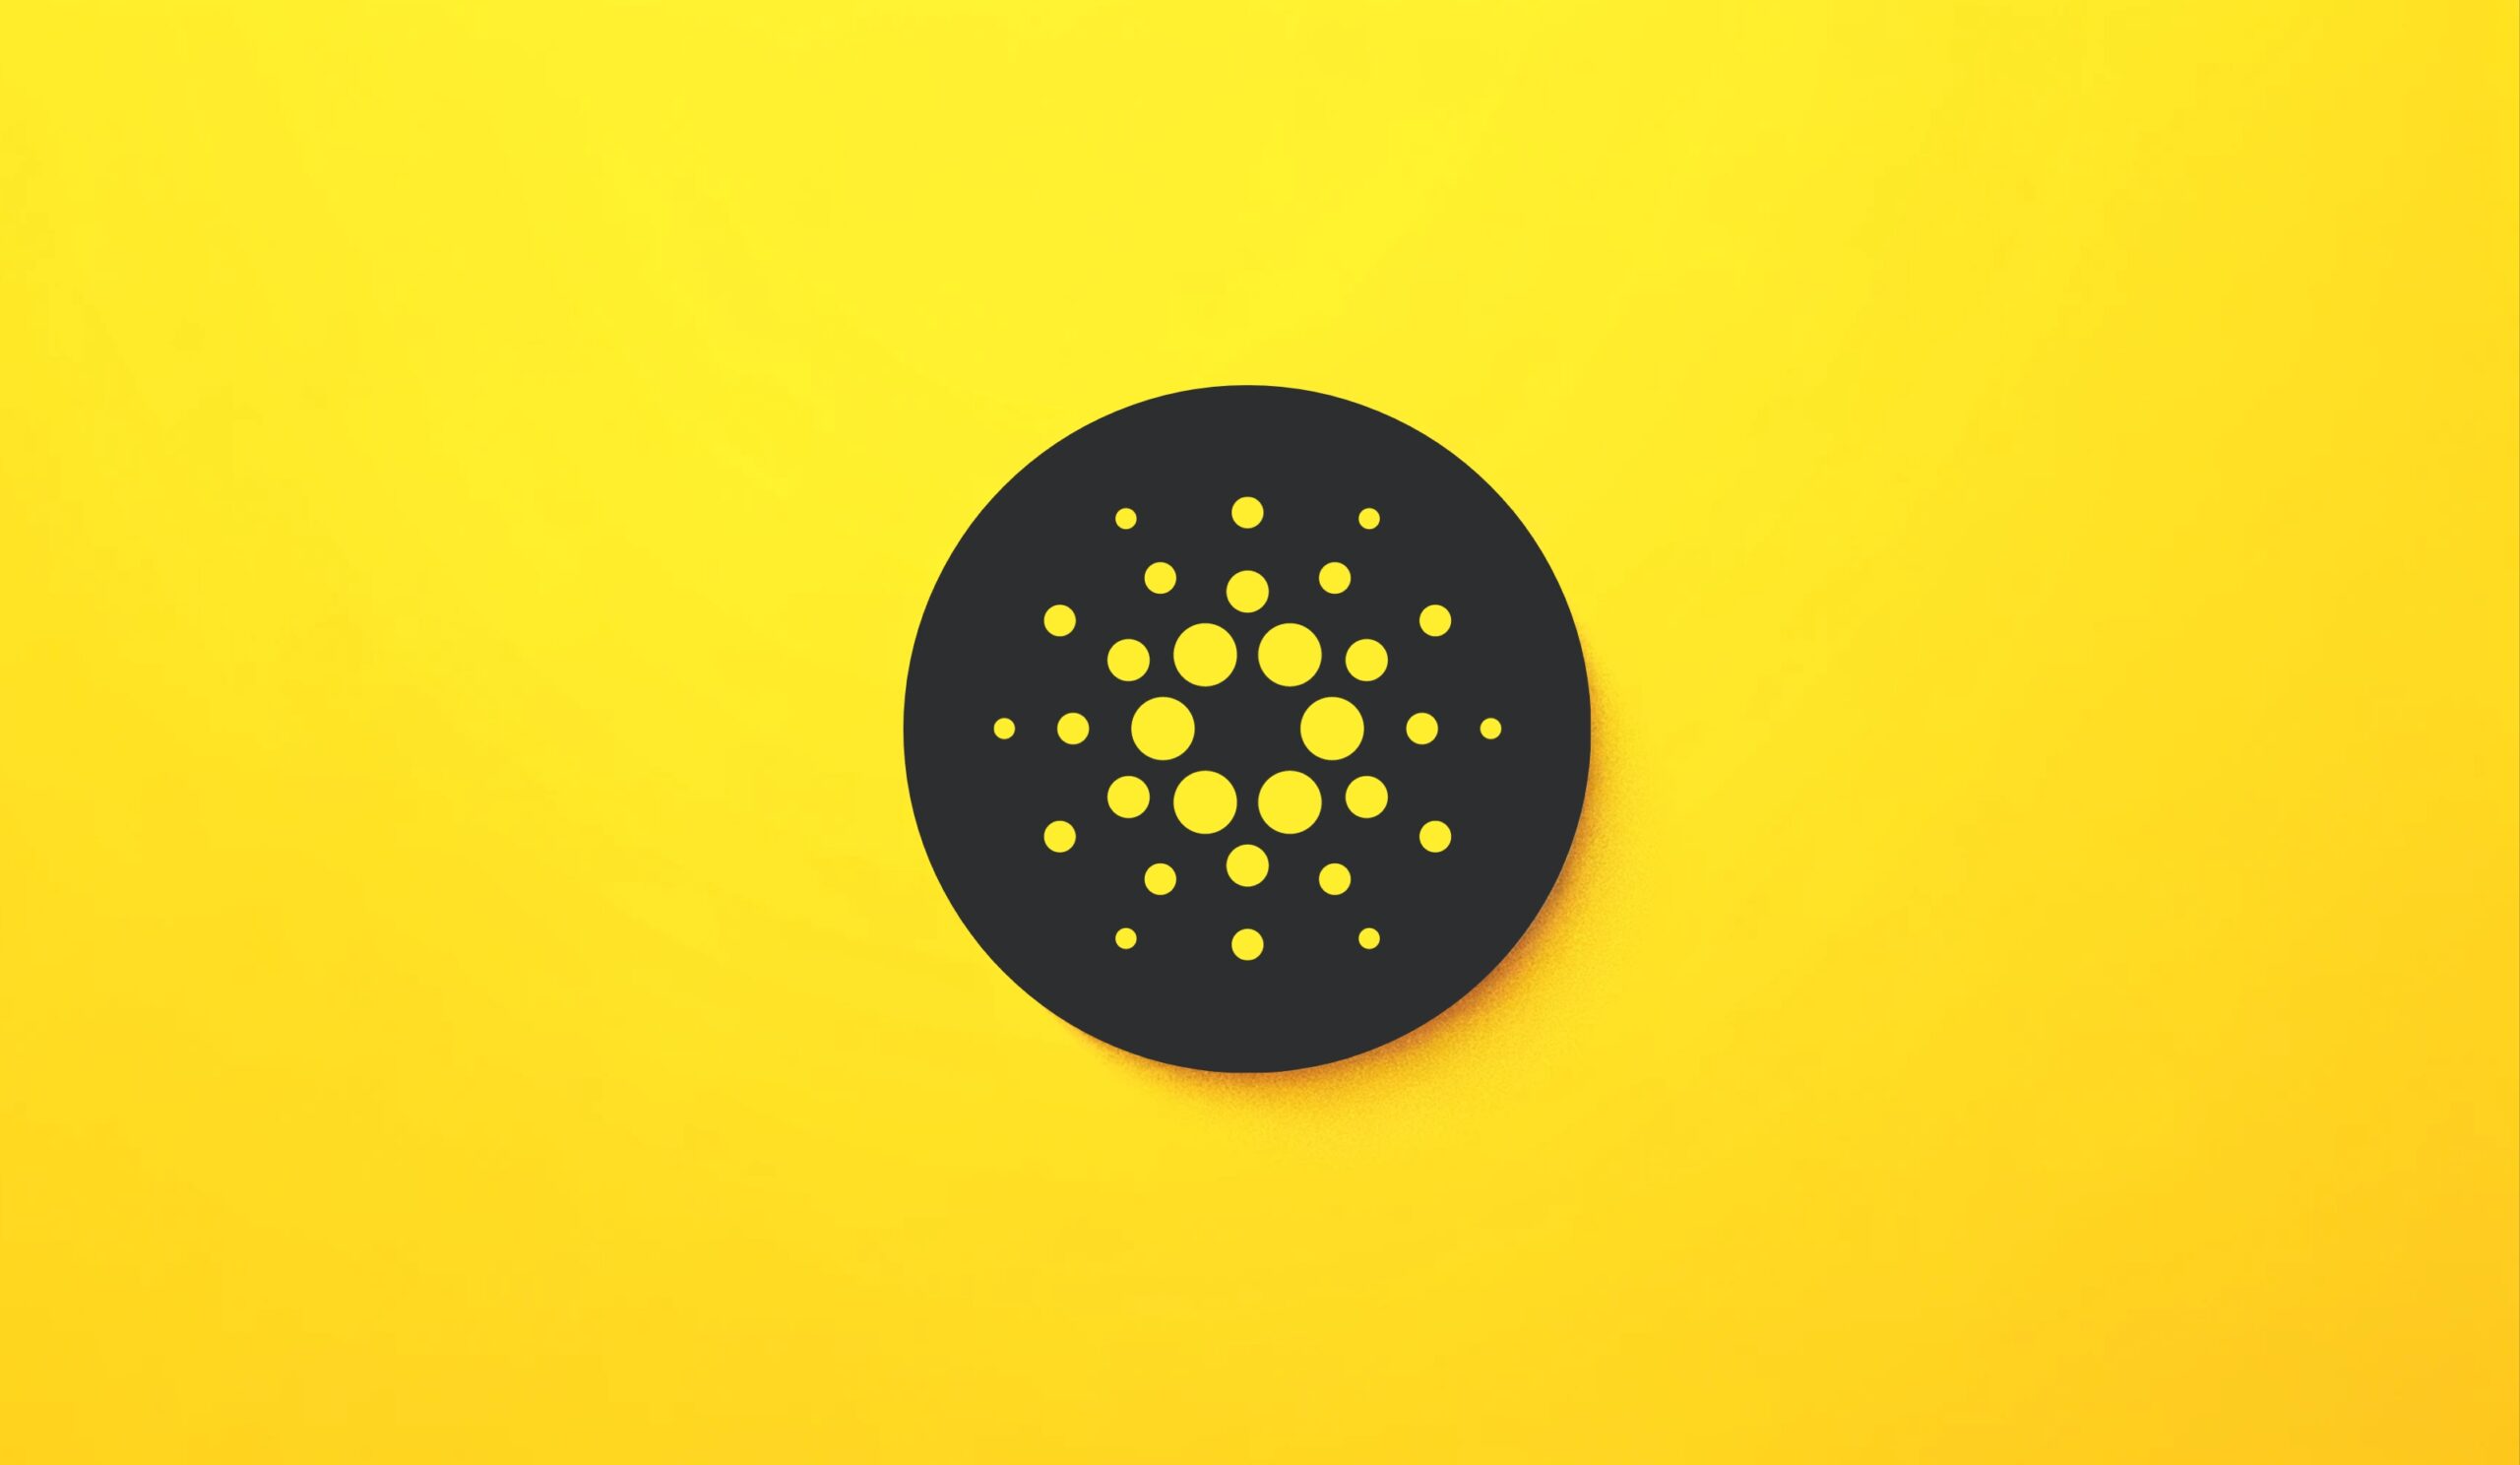 Cardano (ADA) Unveiled A New Era of Smart Contracts and DApps